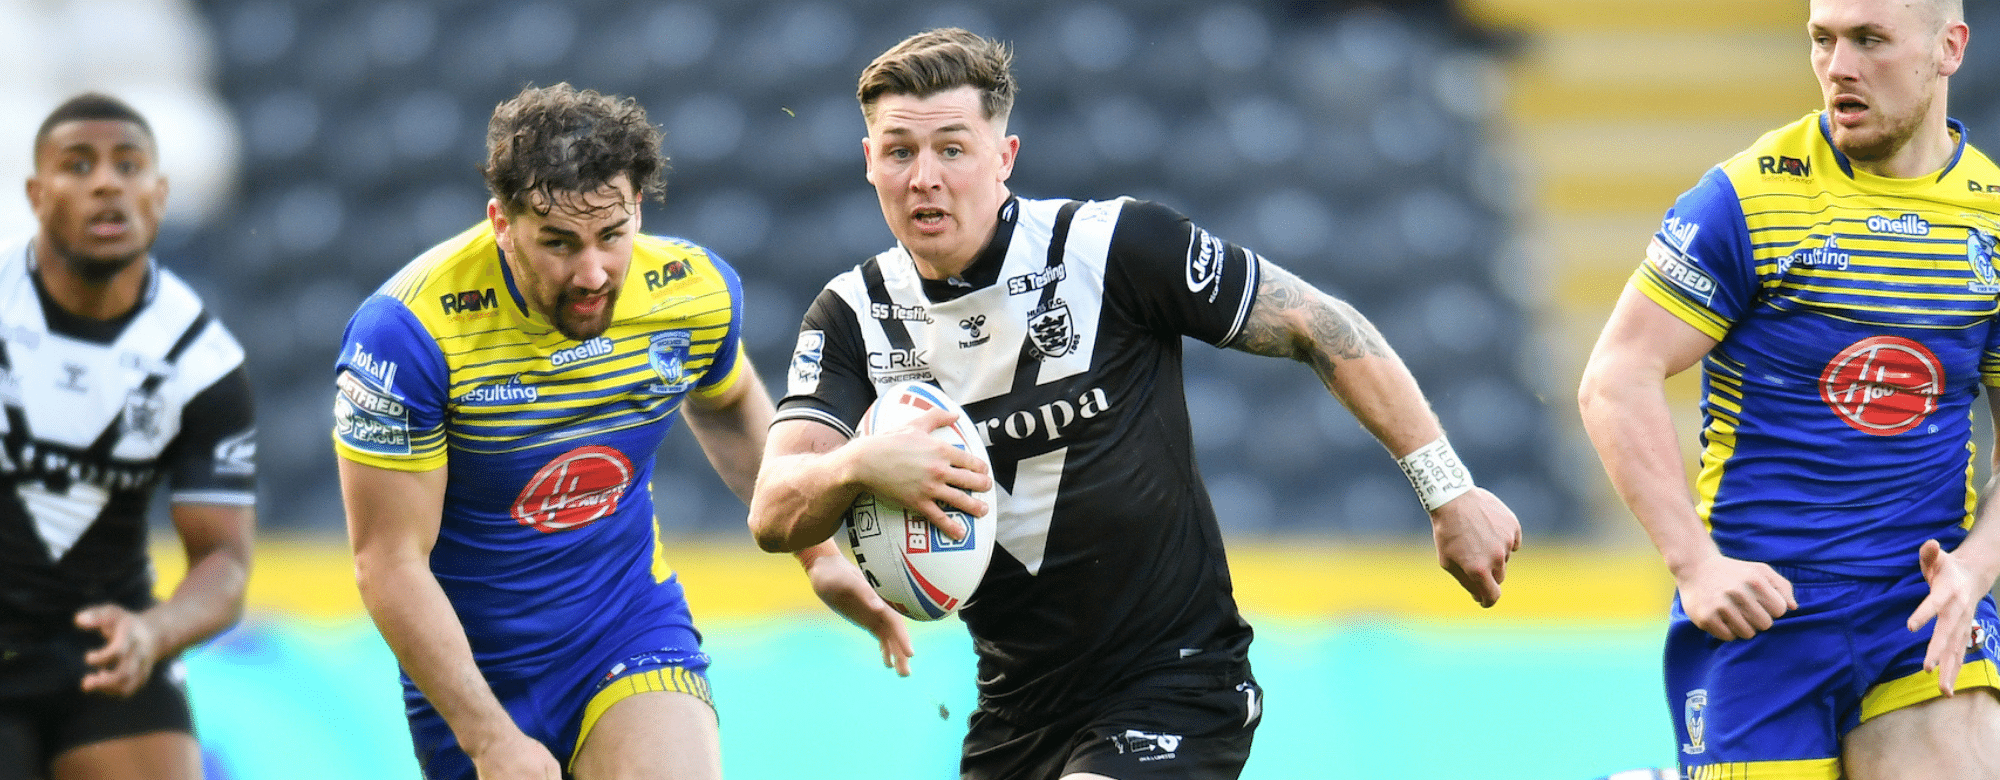 Shaul Joins Wakefield For Remainder Of 2022 Campaign